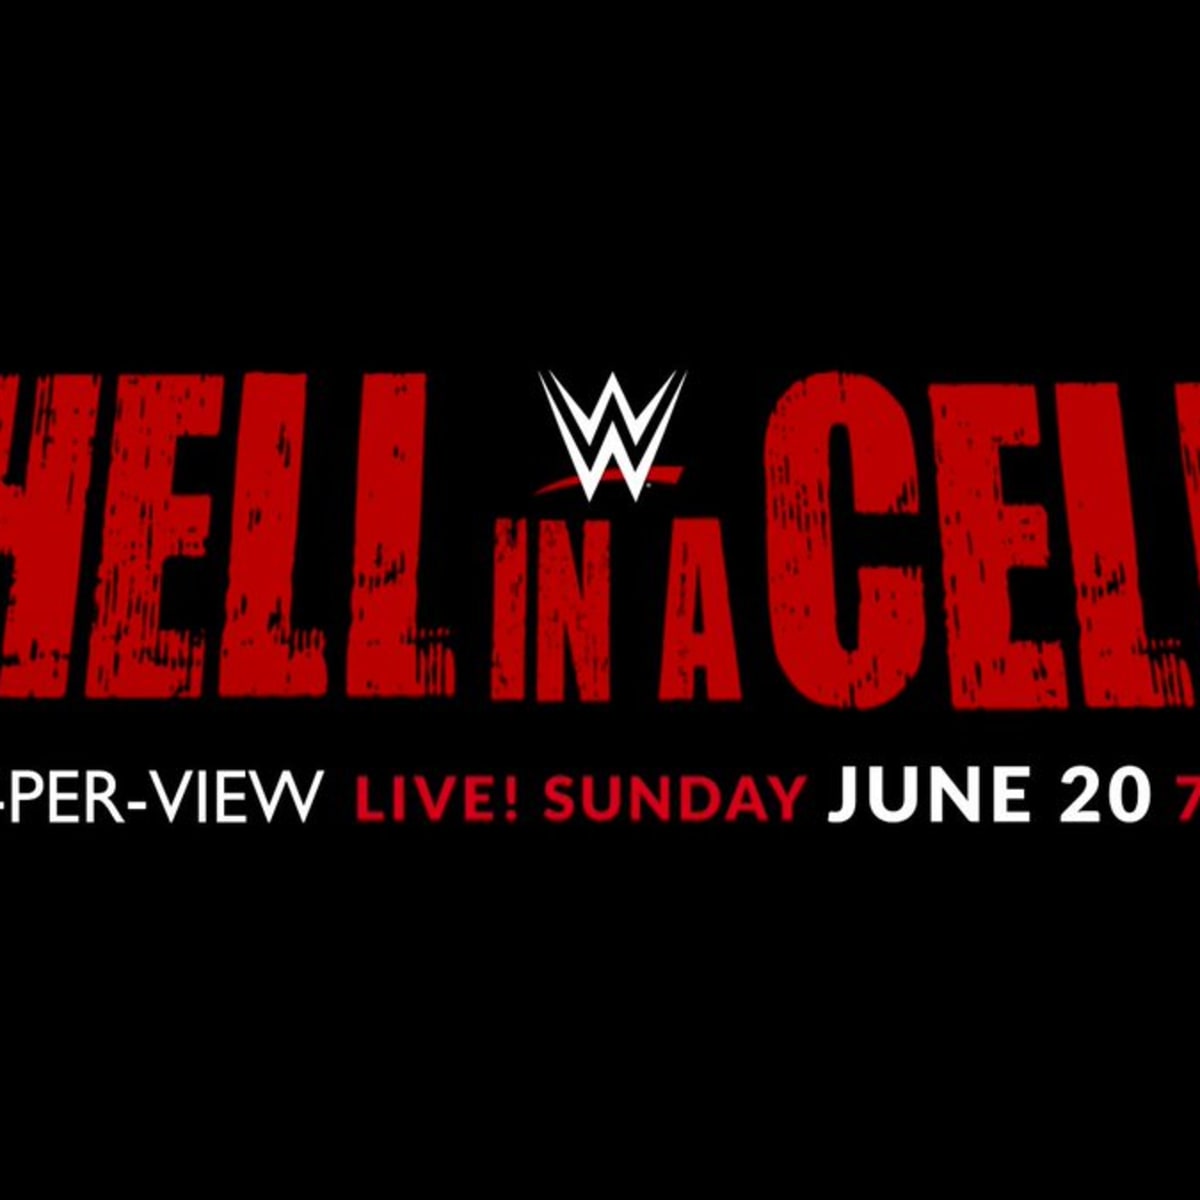 Hell in a cell 2021